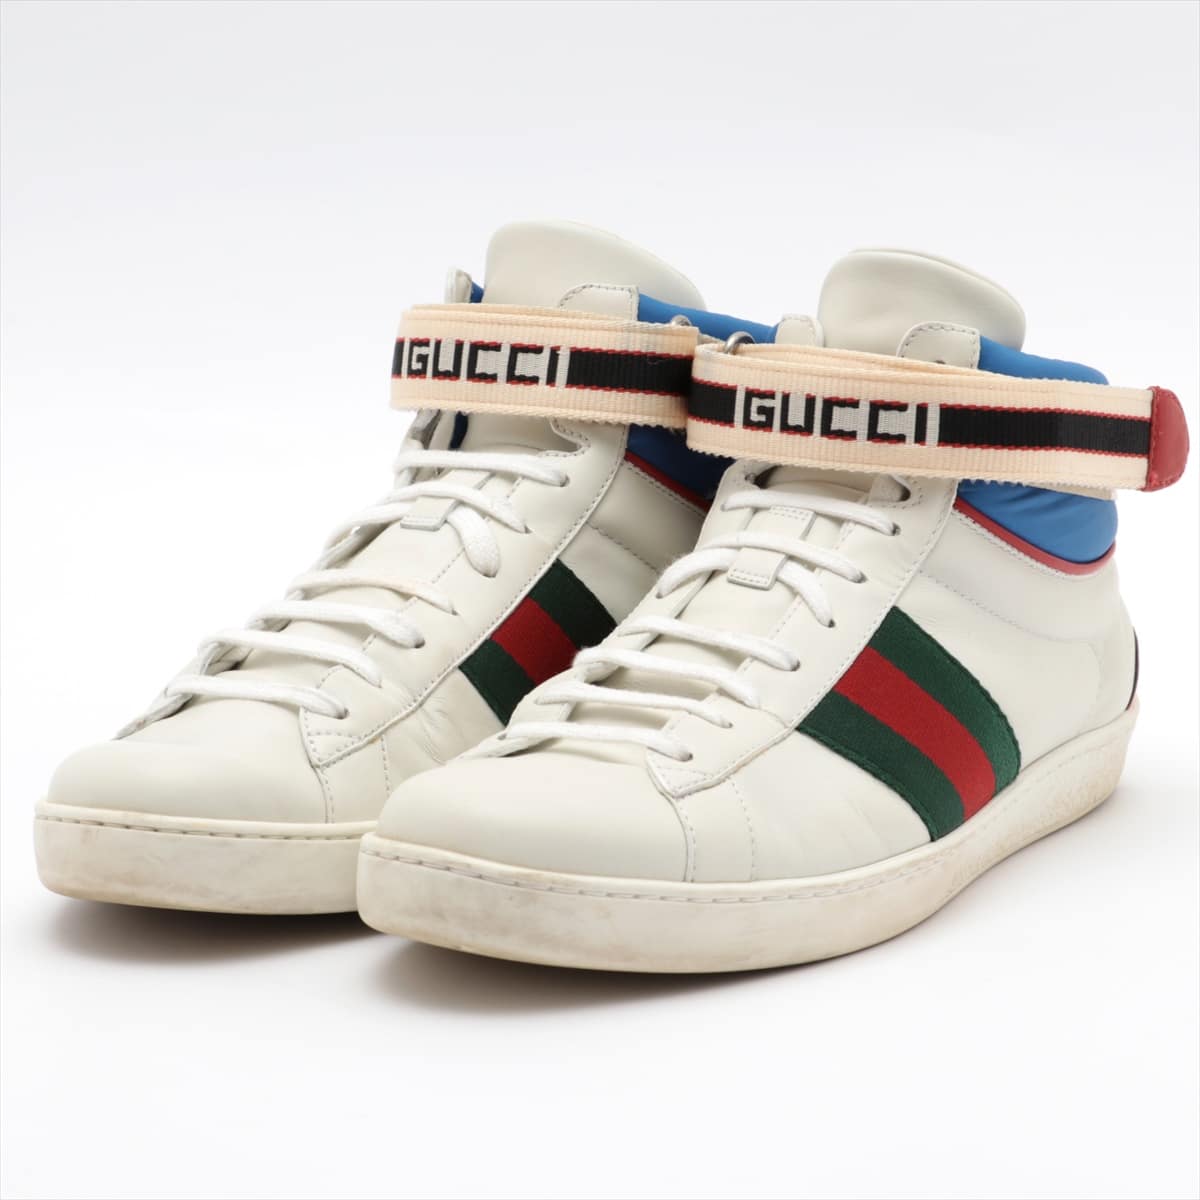 Gucci 18AW Leather High-top Sneakers 8.5 Men's White ACE